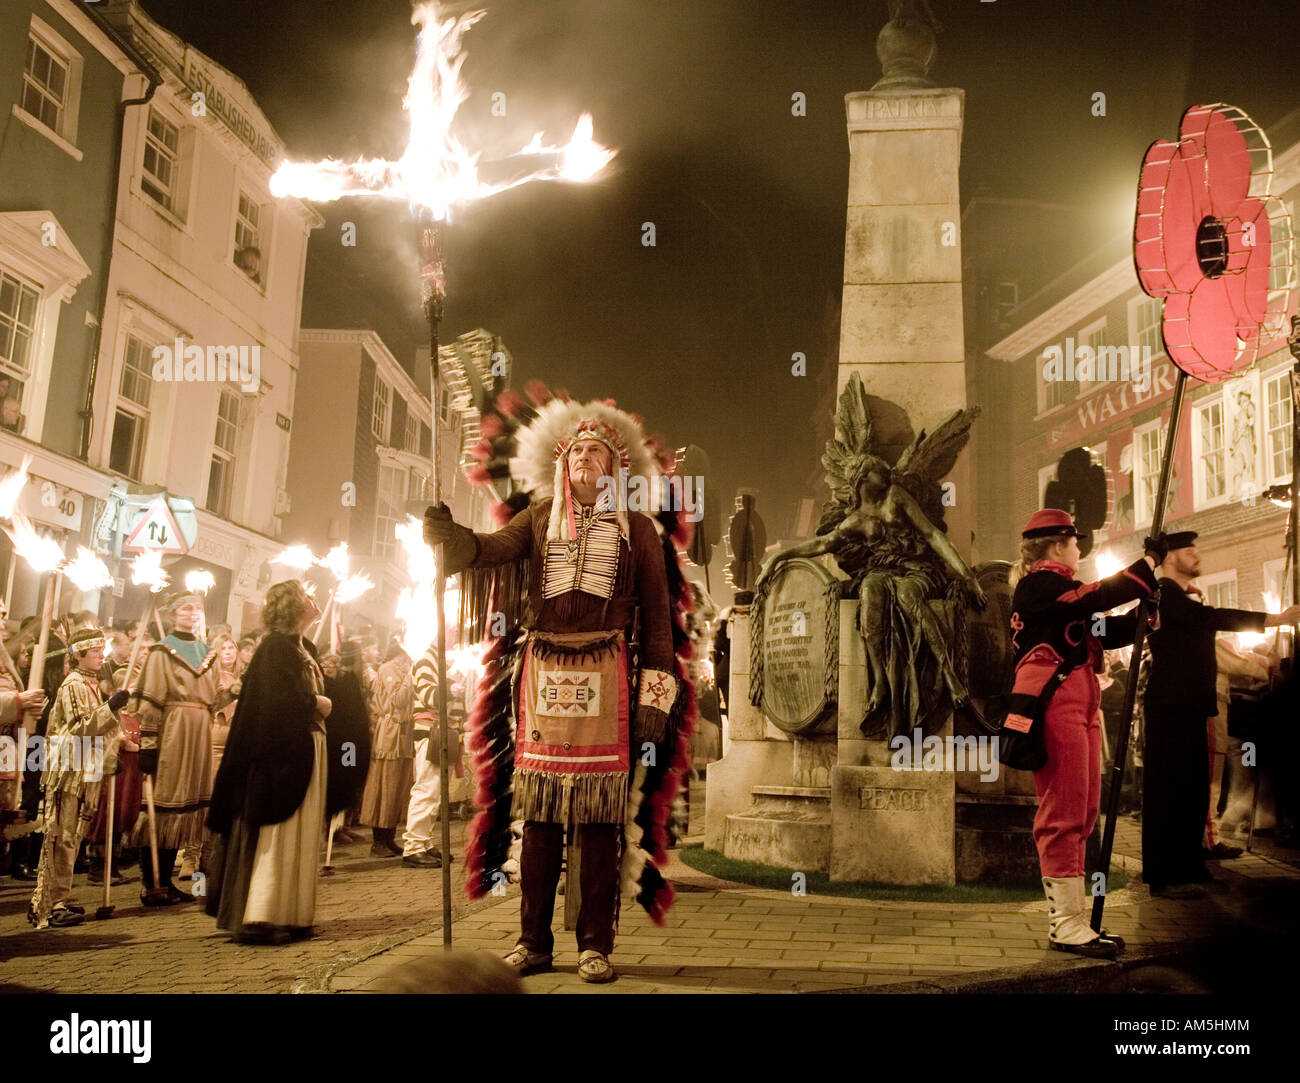 Red Indian Chief Burning Crosses Torchlight procession At The Lewes Fire Festival Sussex UK Europe Stock Photo